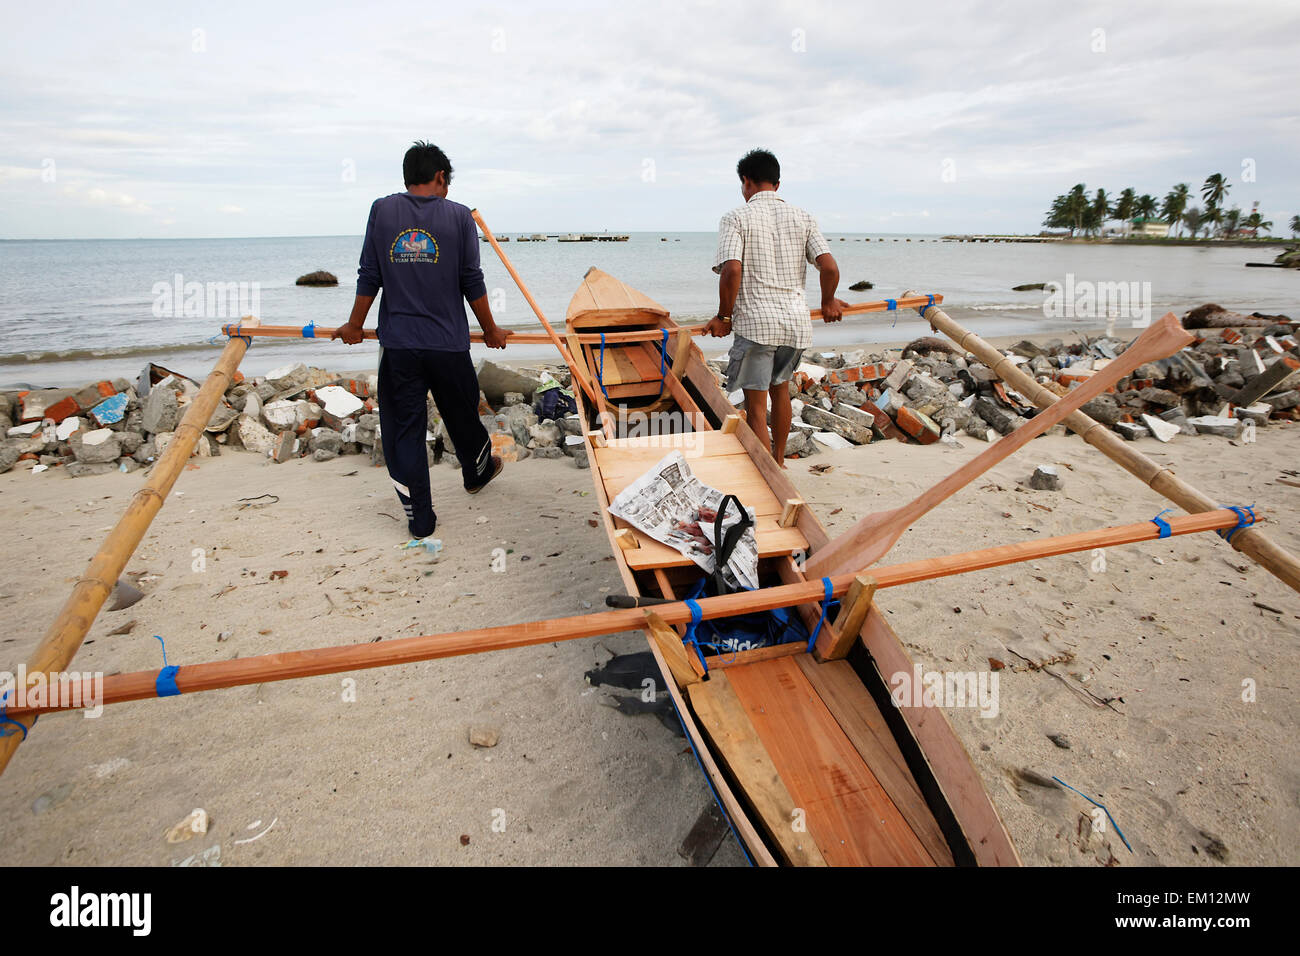 Boat,Aceh Province,Indonesia,Pulling,Fishermen Stock Photo